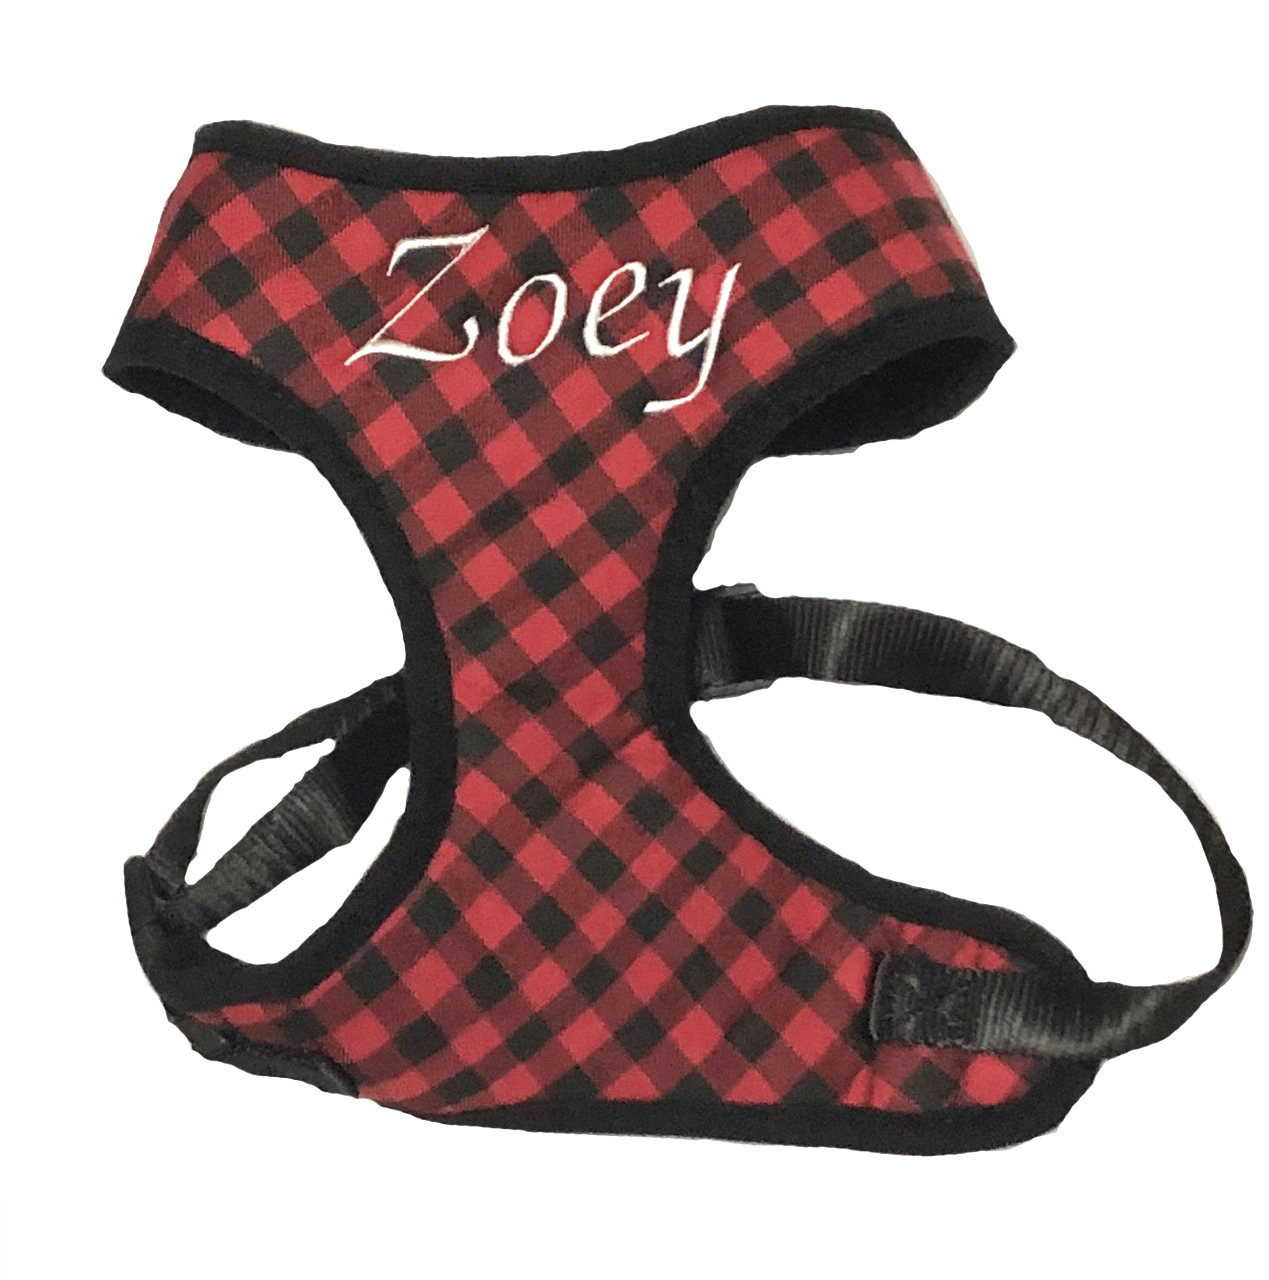 #1 Best Seller Personalized Dog Harness Buffalo Check Custom Embroidered with Name